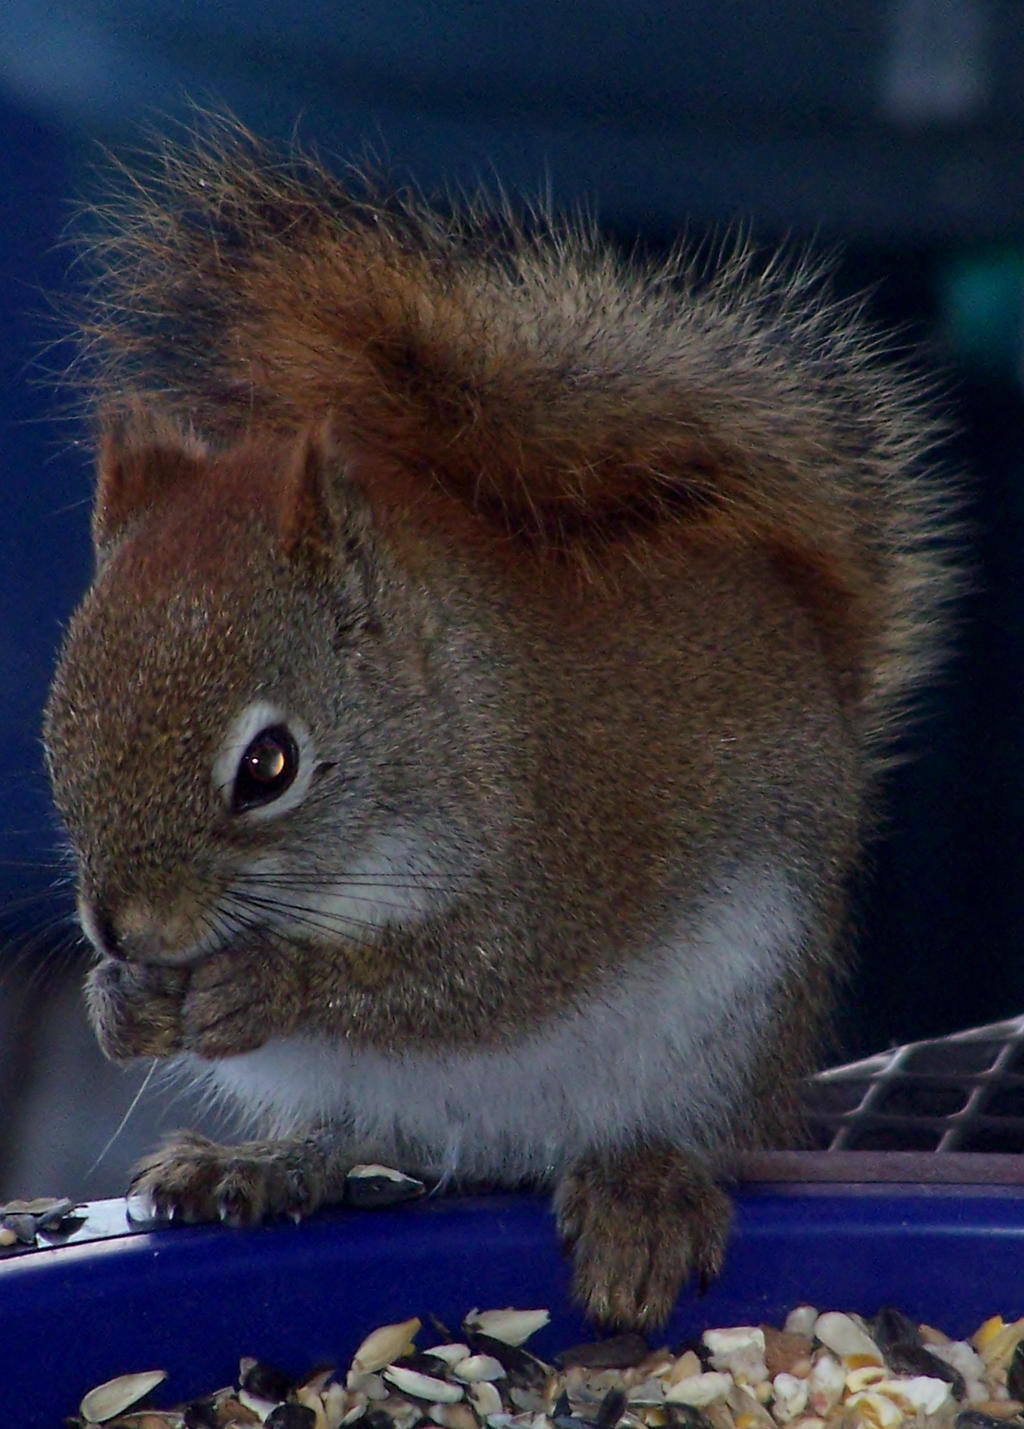 my awesome squirrel friend..